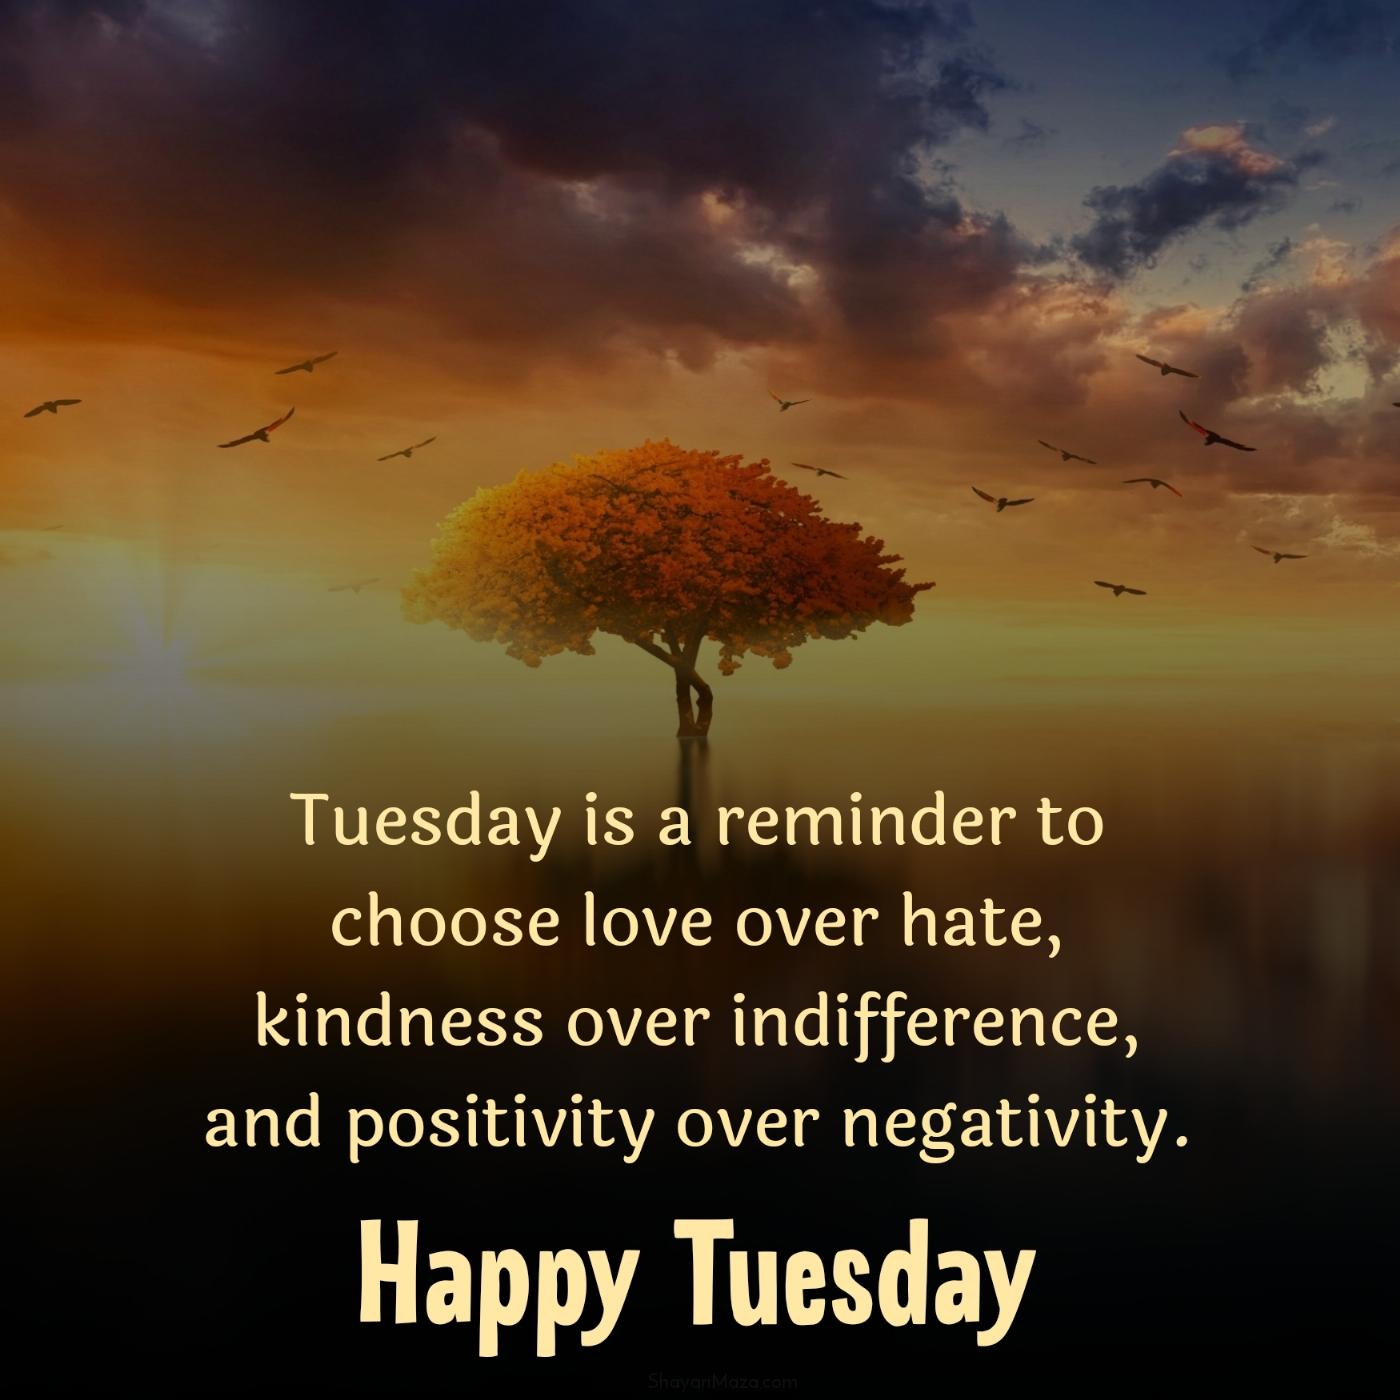 Tuesday is a reminder to choose love over hate